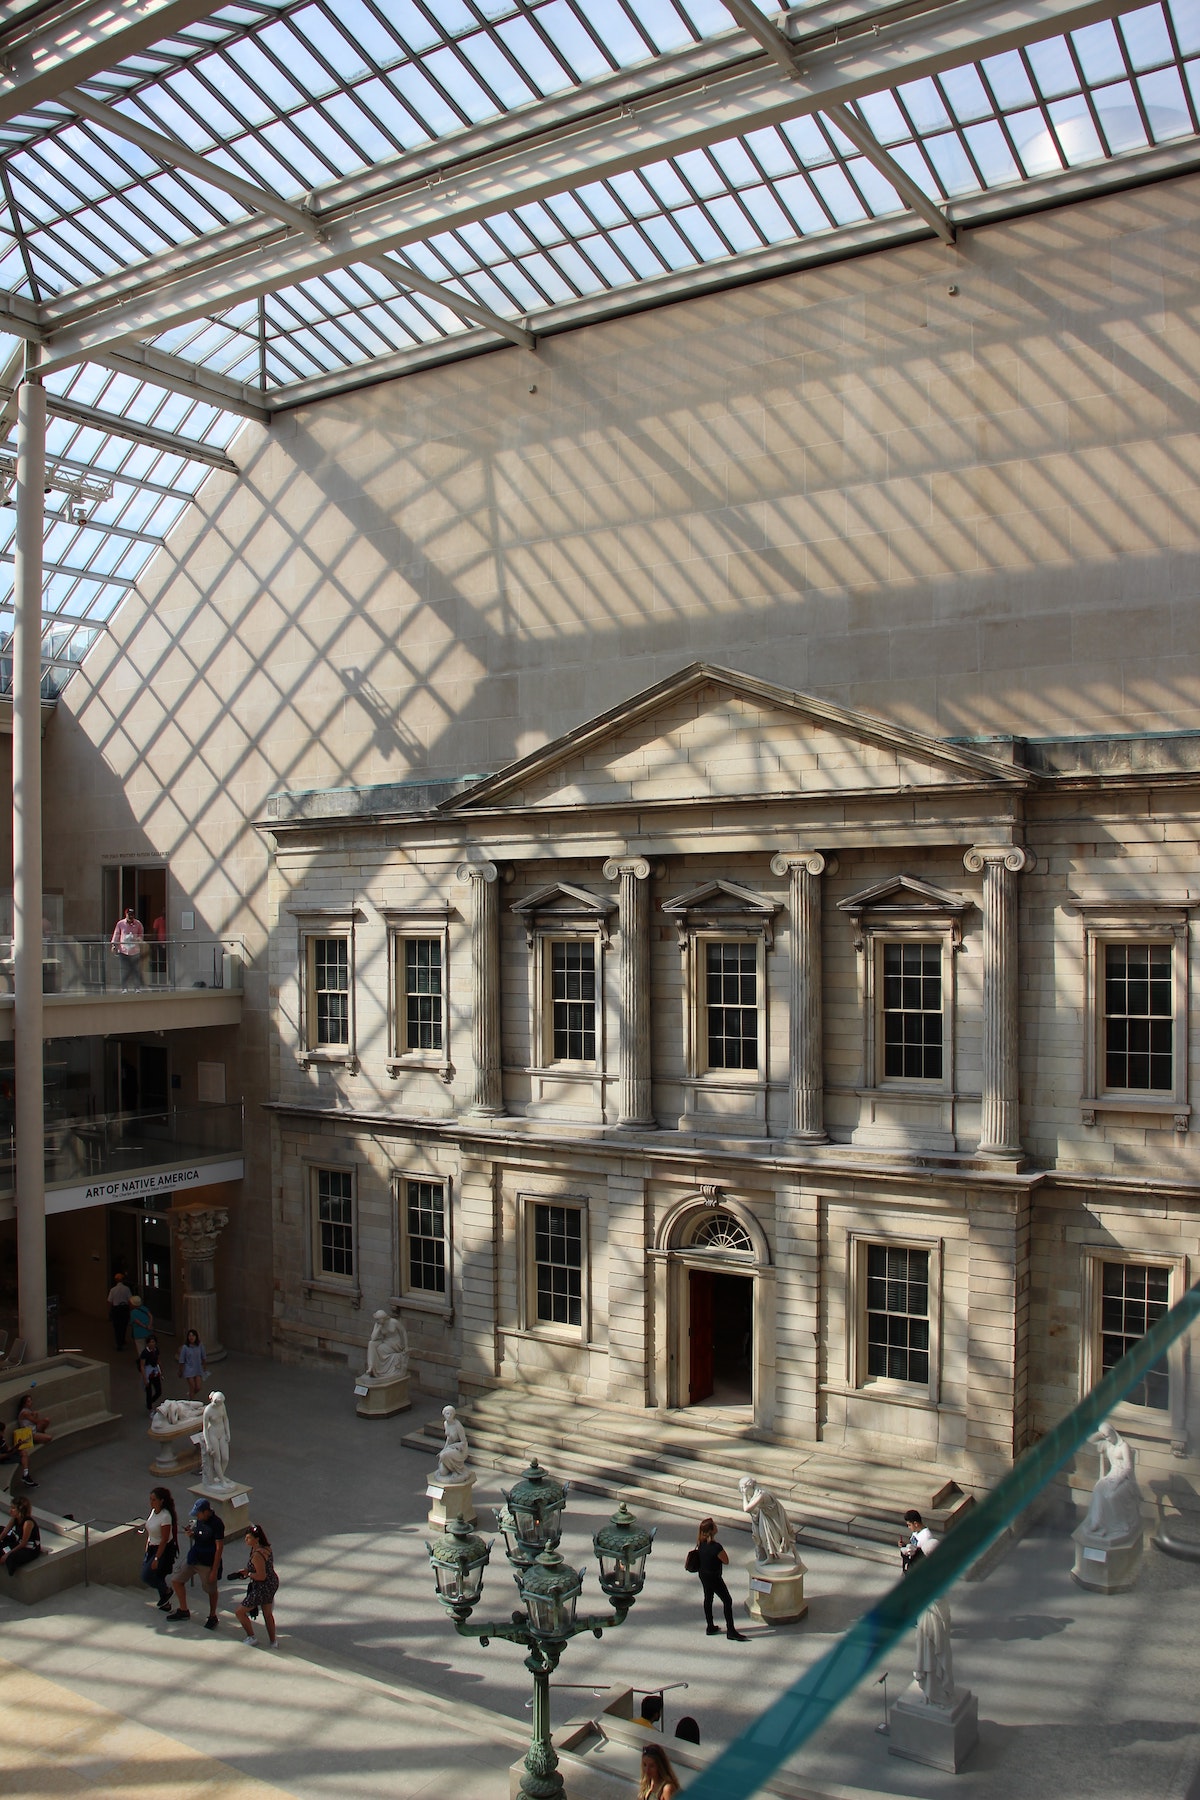 Museum interior with high, windowed ceilings and light streaming in through the slats